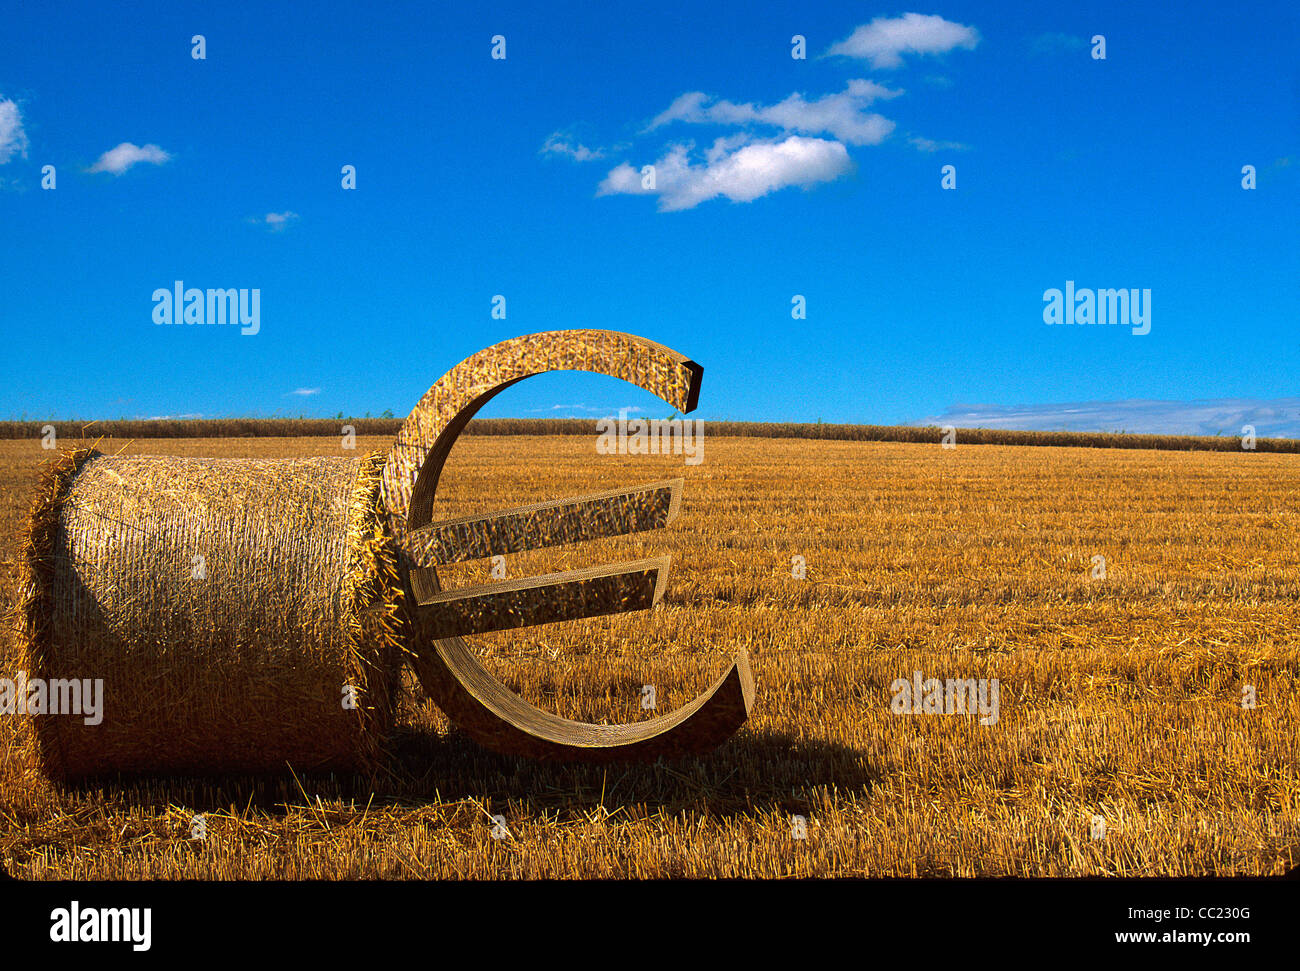 Agriculture / Farming concept : Euro sign leaning against a bale of straw on a harvested wheat field Stock Photo